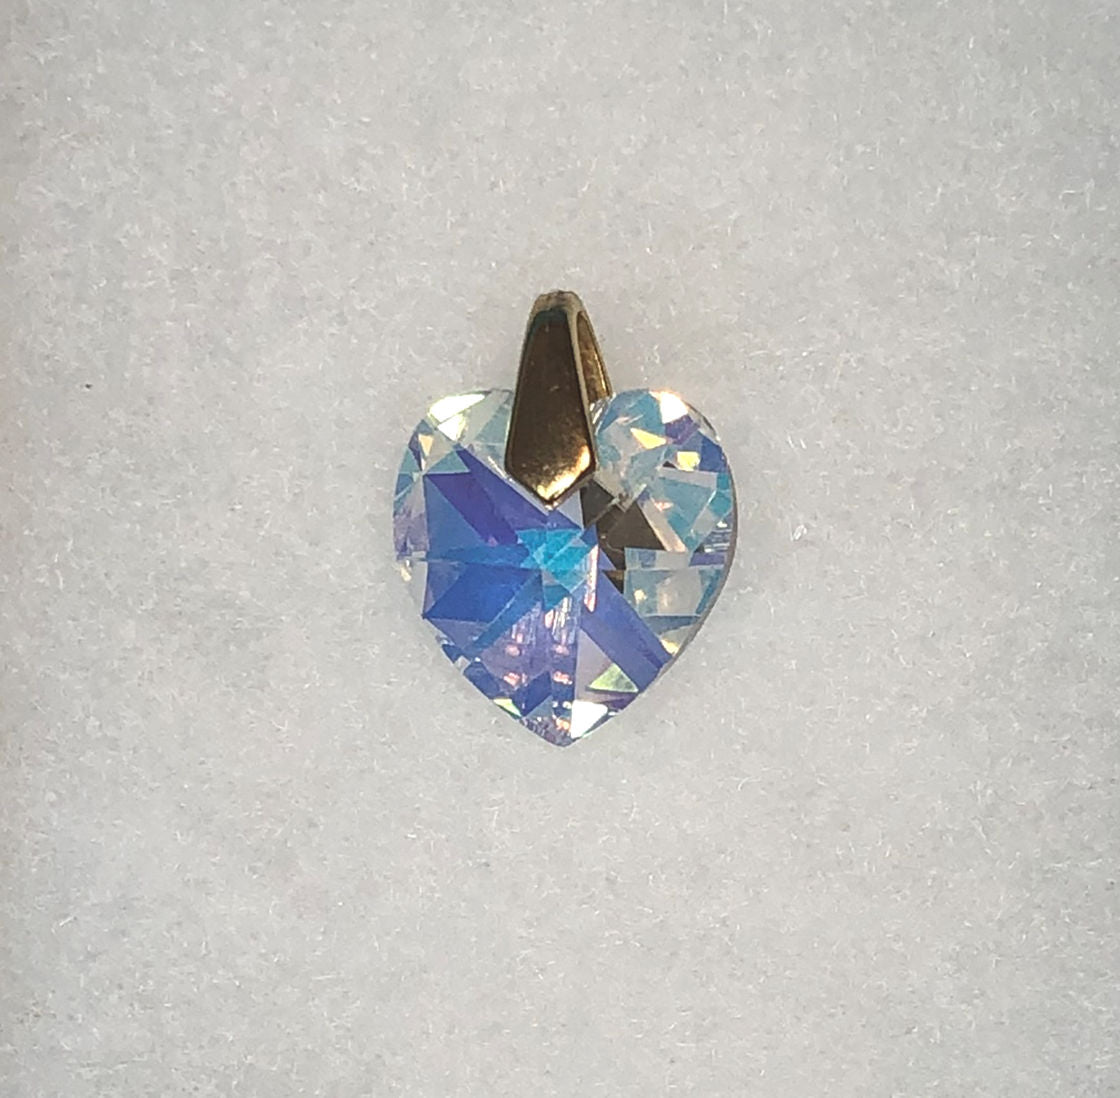 Faceted Crystal Heart Pendant, Foil Backed, Non-Tarnish Gold Bail, 18 x 14 x 8 mm